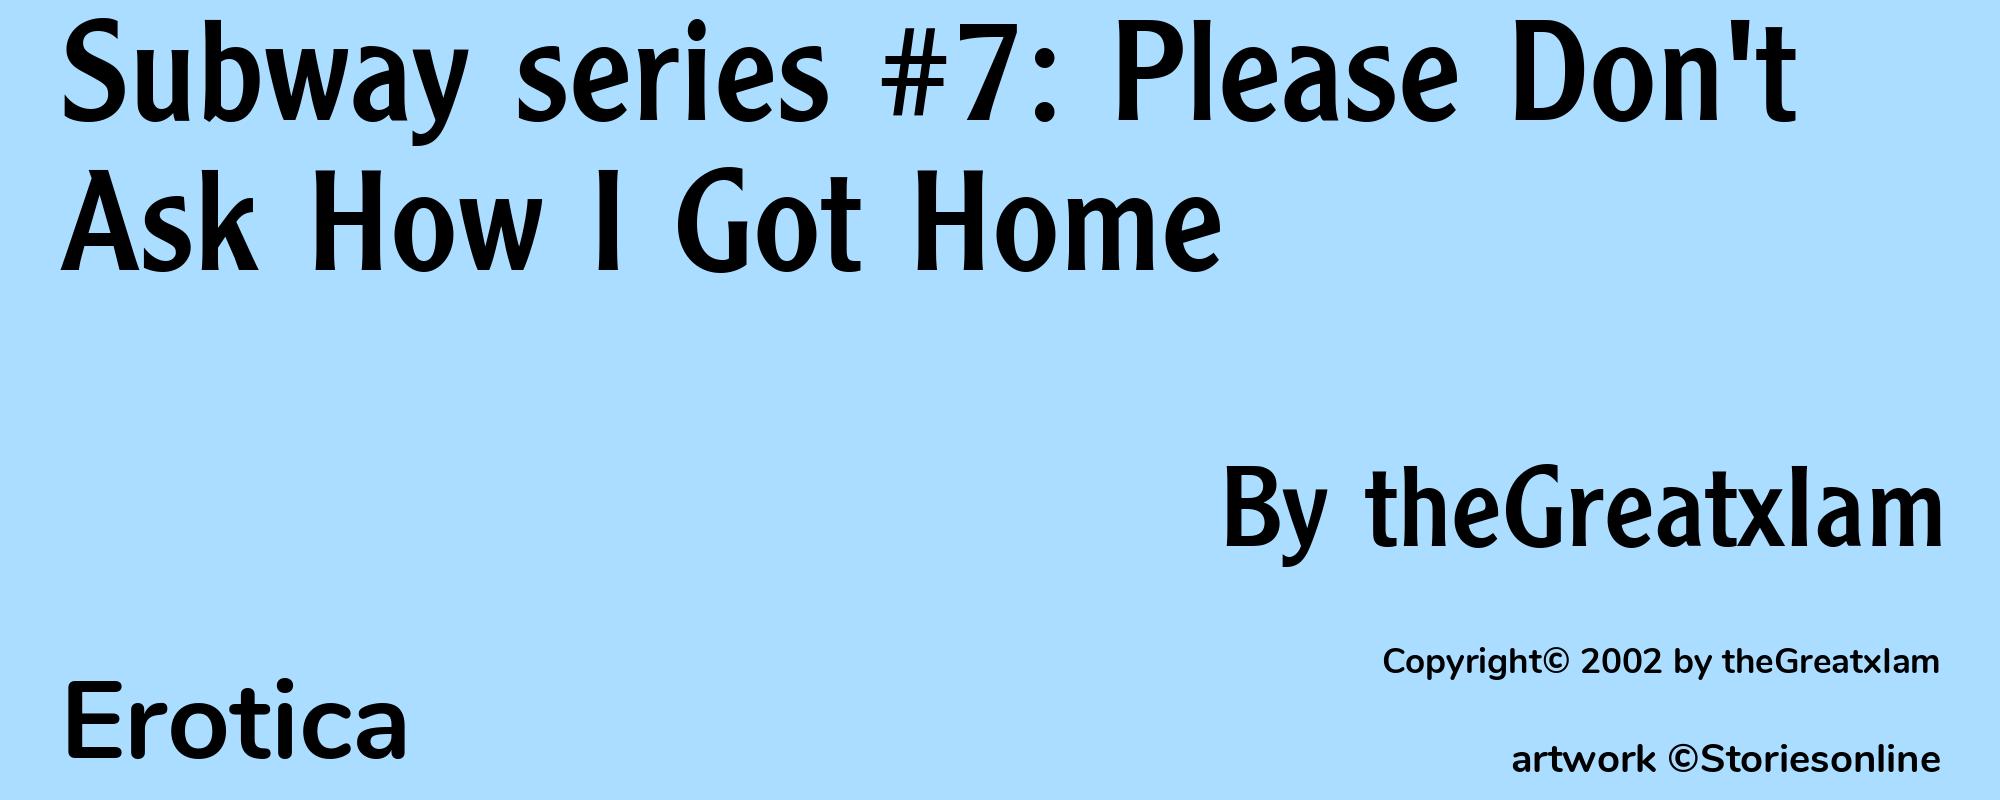 Subway series #7: Please Don't Ask How I Got Home - Cover